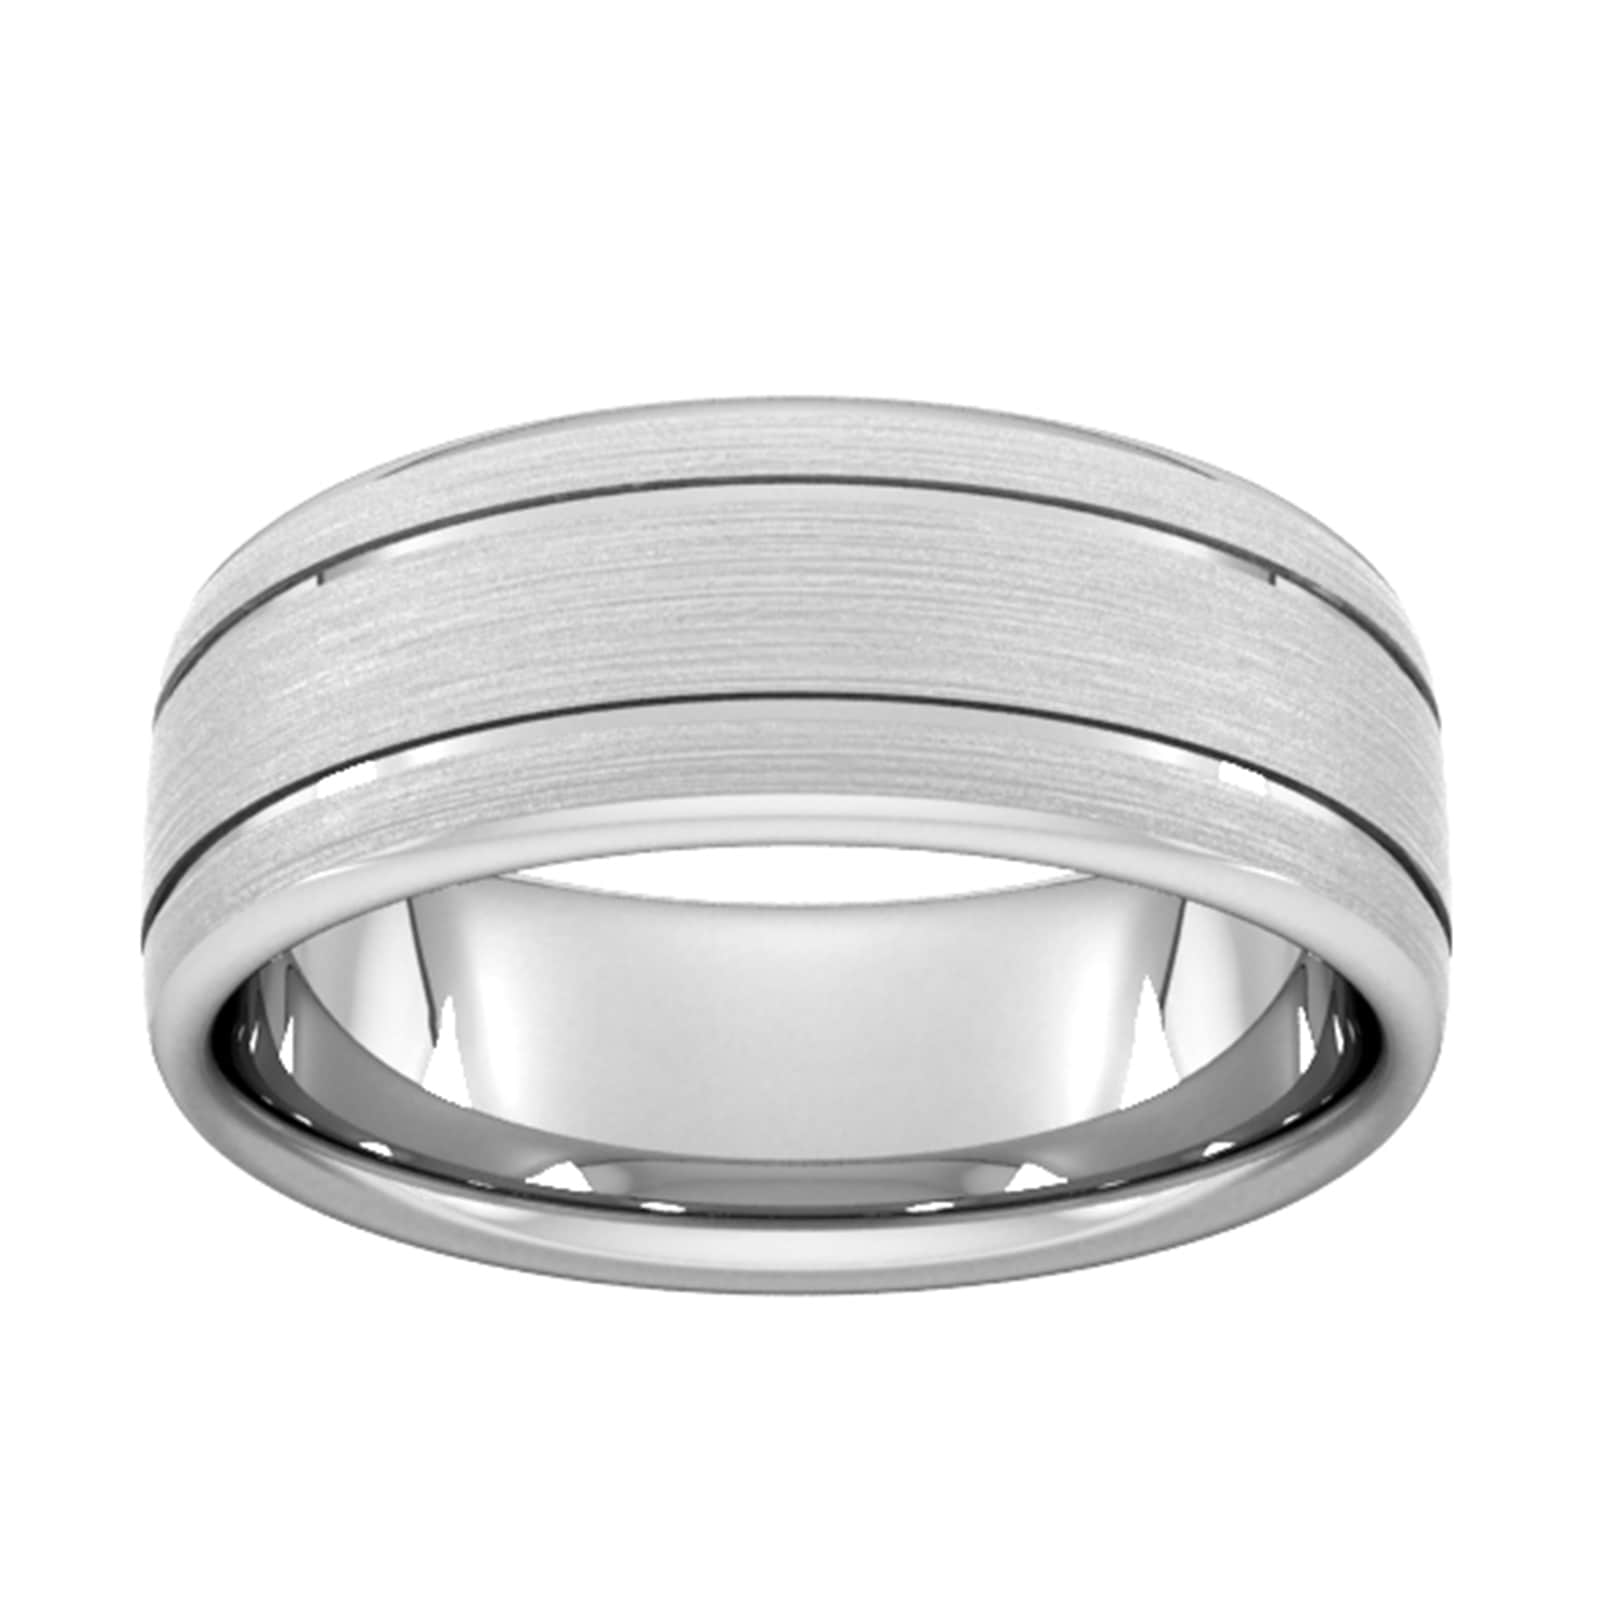 8mm Flat Court Heavy Matt Finish With Double Grooves Wedding Ring In 9 Carat White Gold - Ring Size T